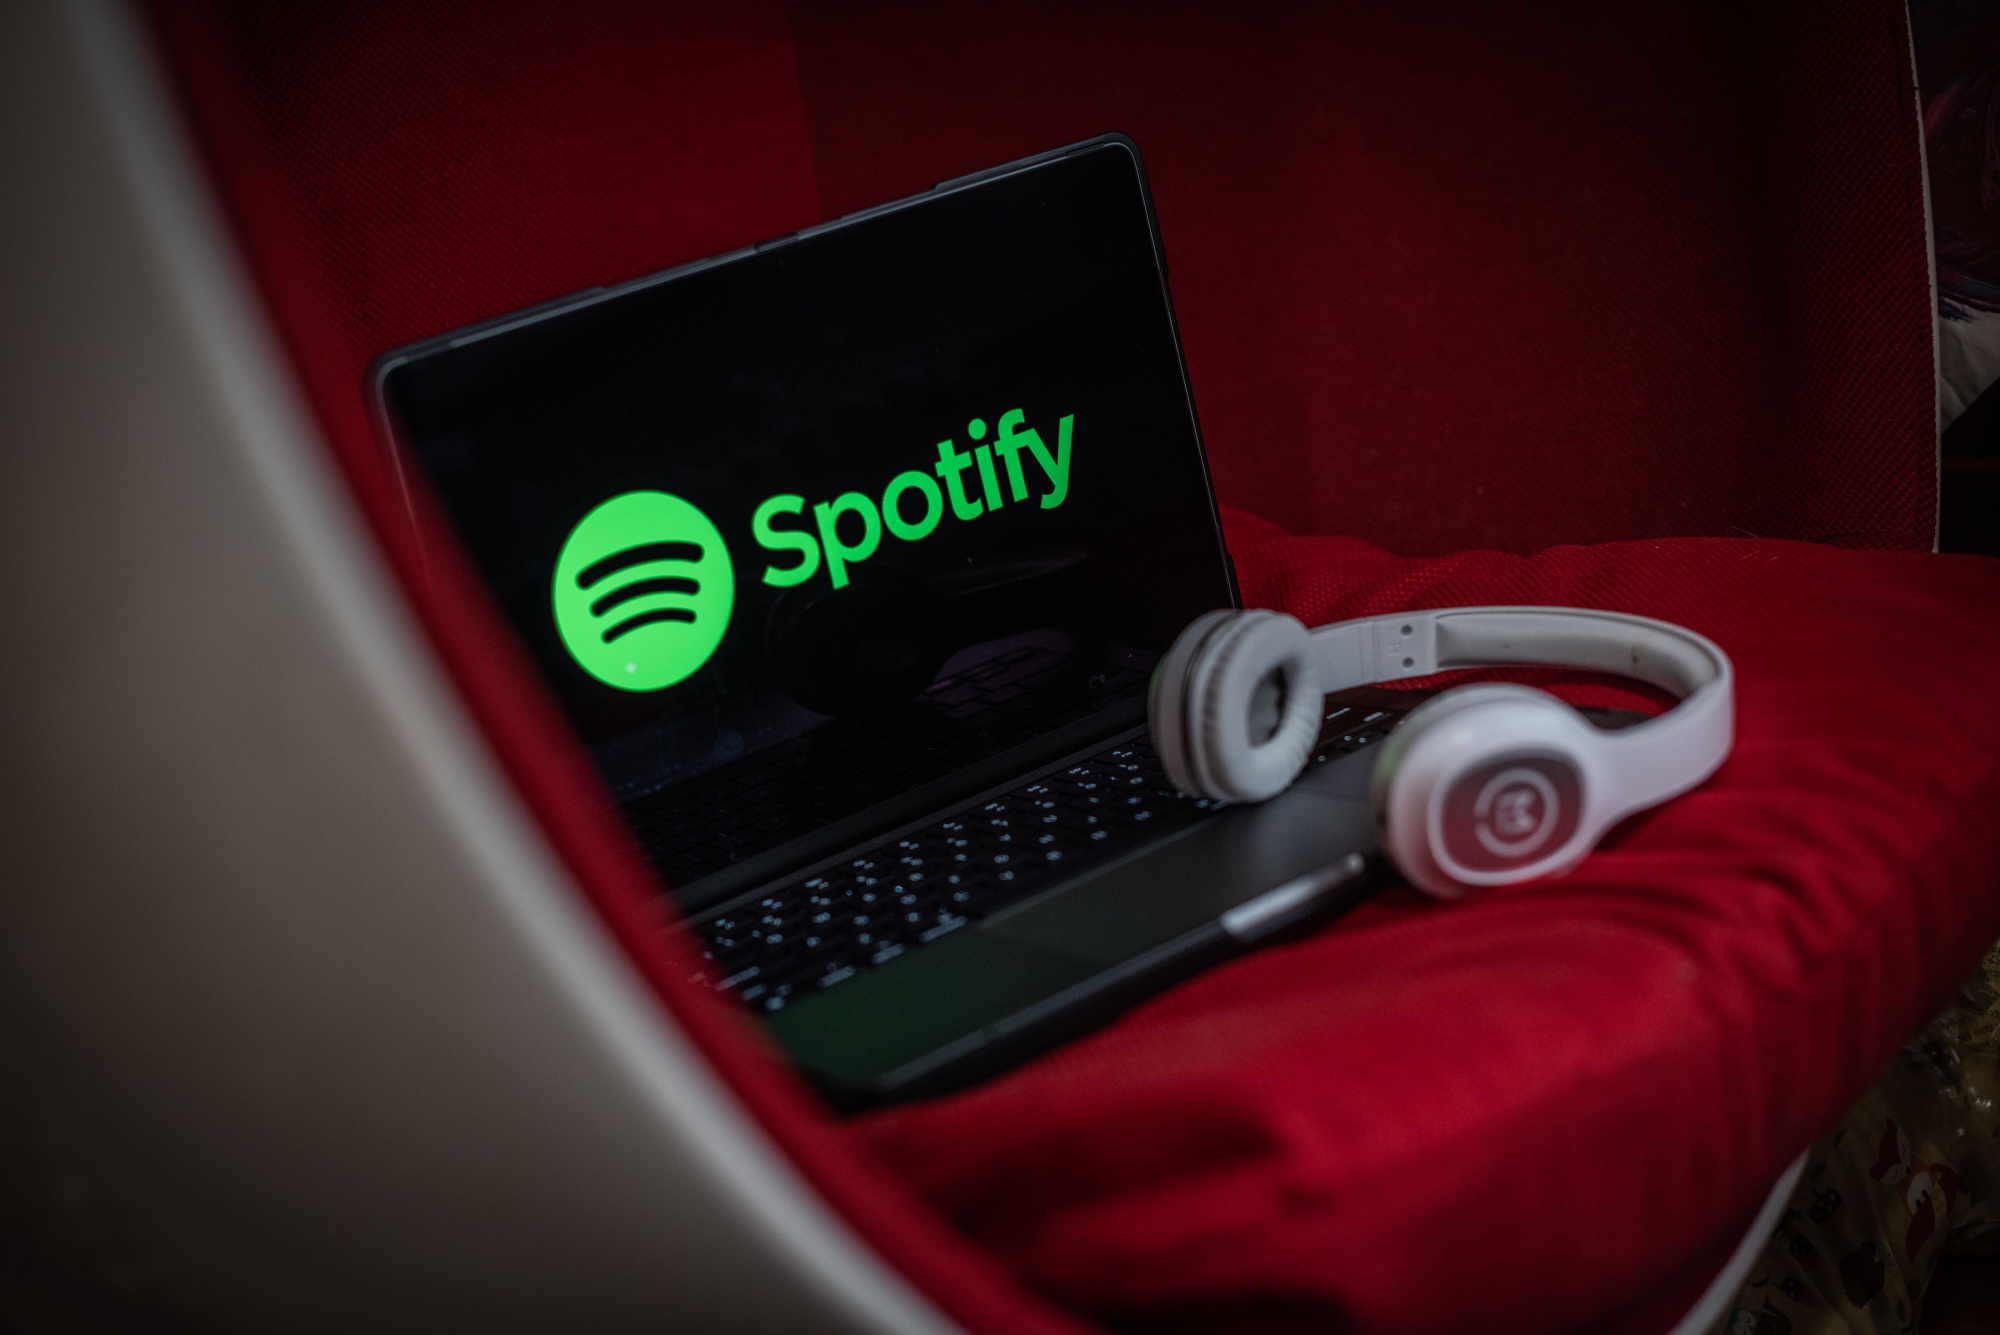 Spotify Premium Now Includes Instant Access to 150,000+ Audiobooks in the  UK and Australia